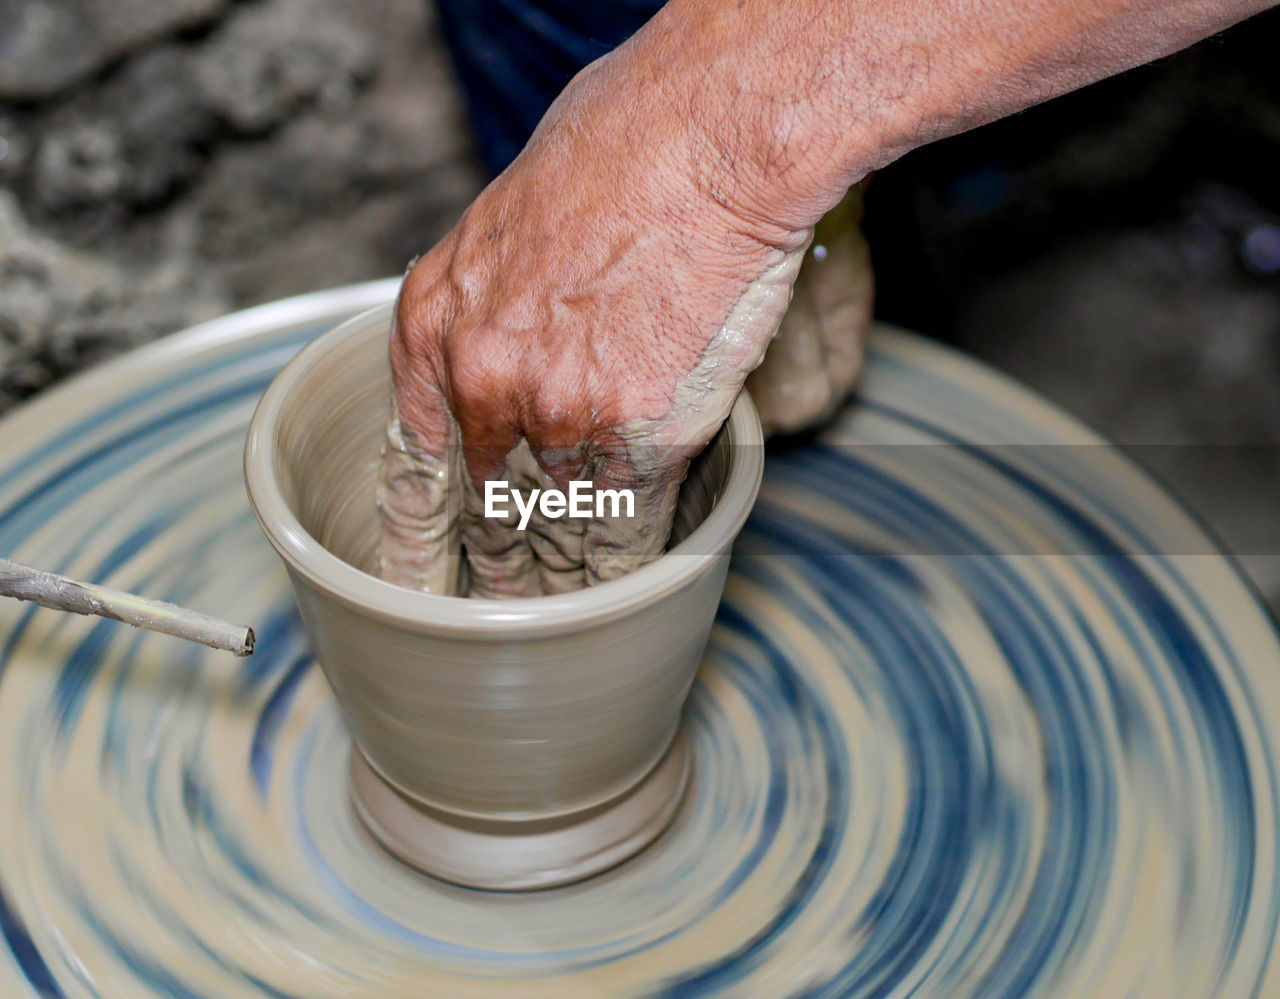 Cropped hand of man making pottery on pottery wheel in workshop